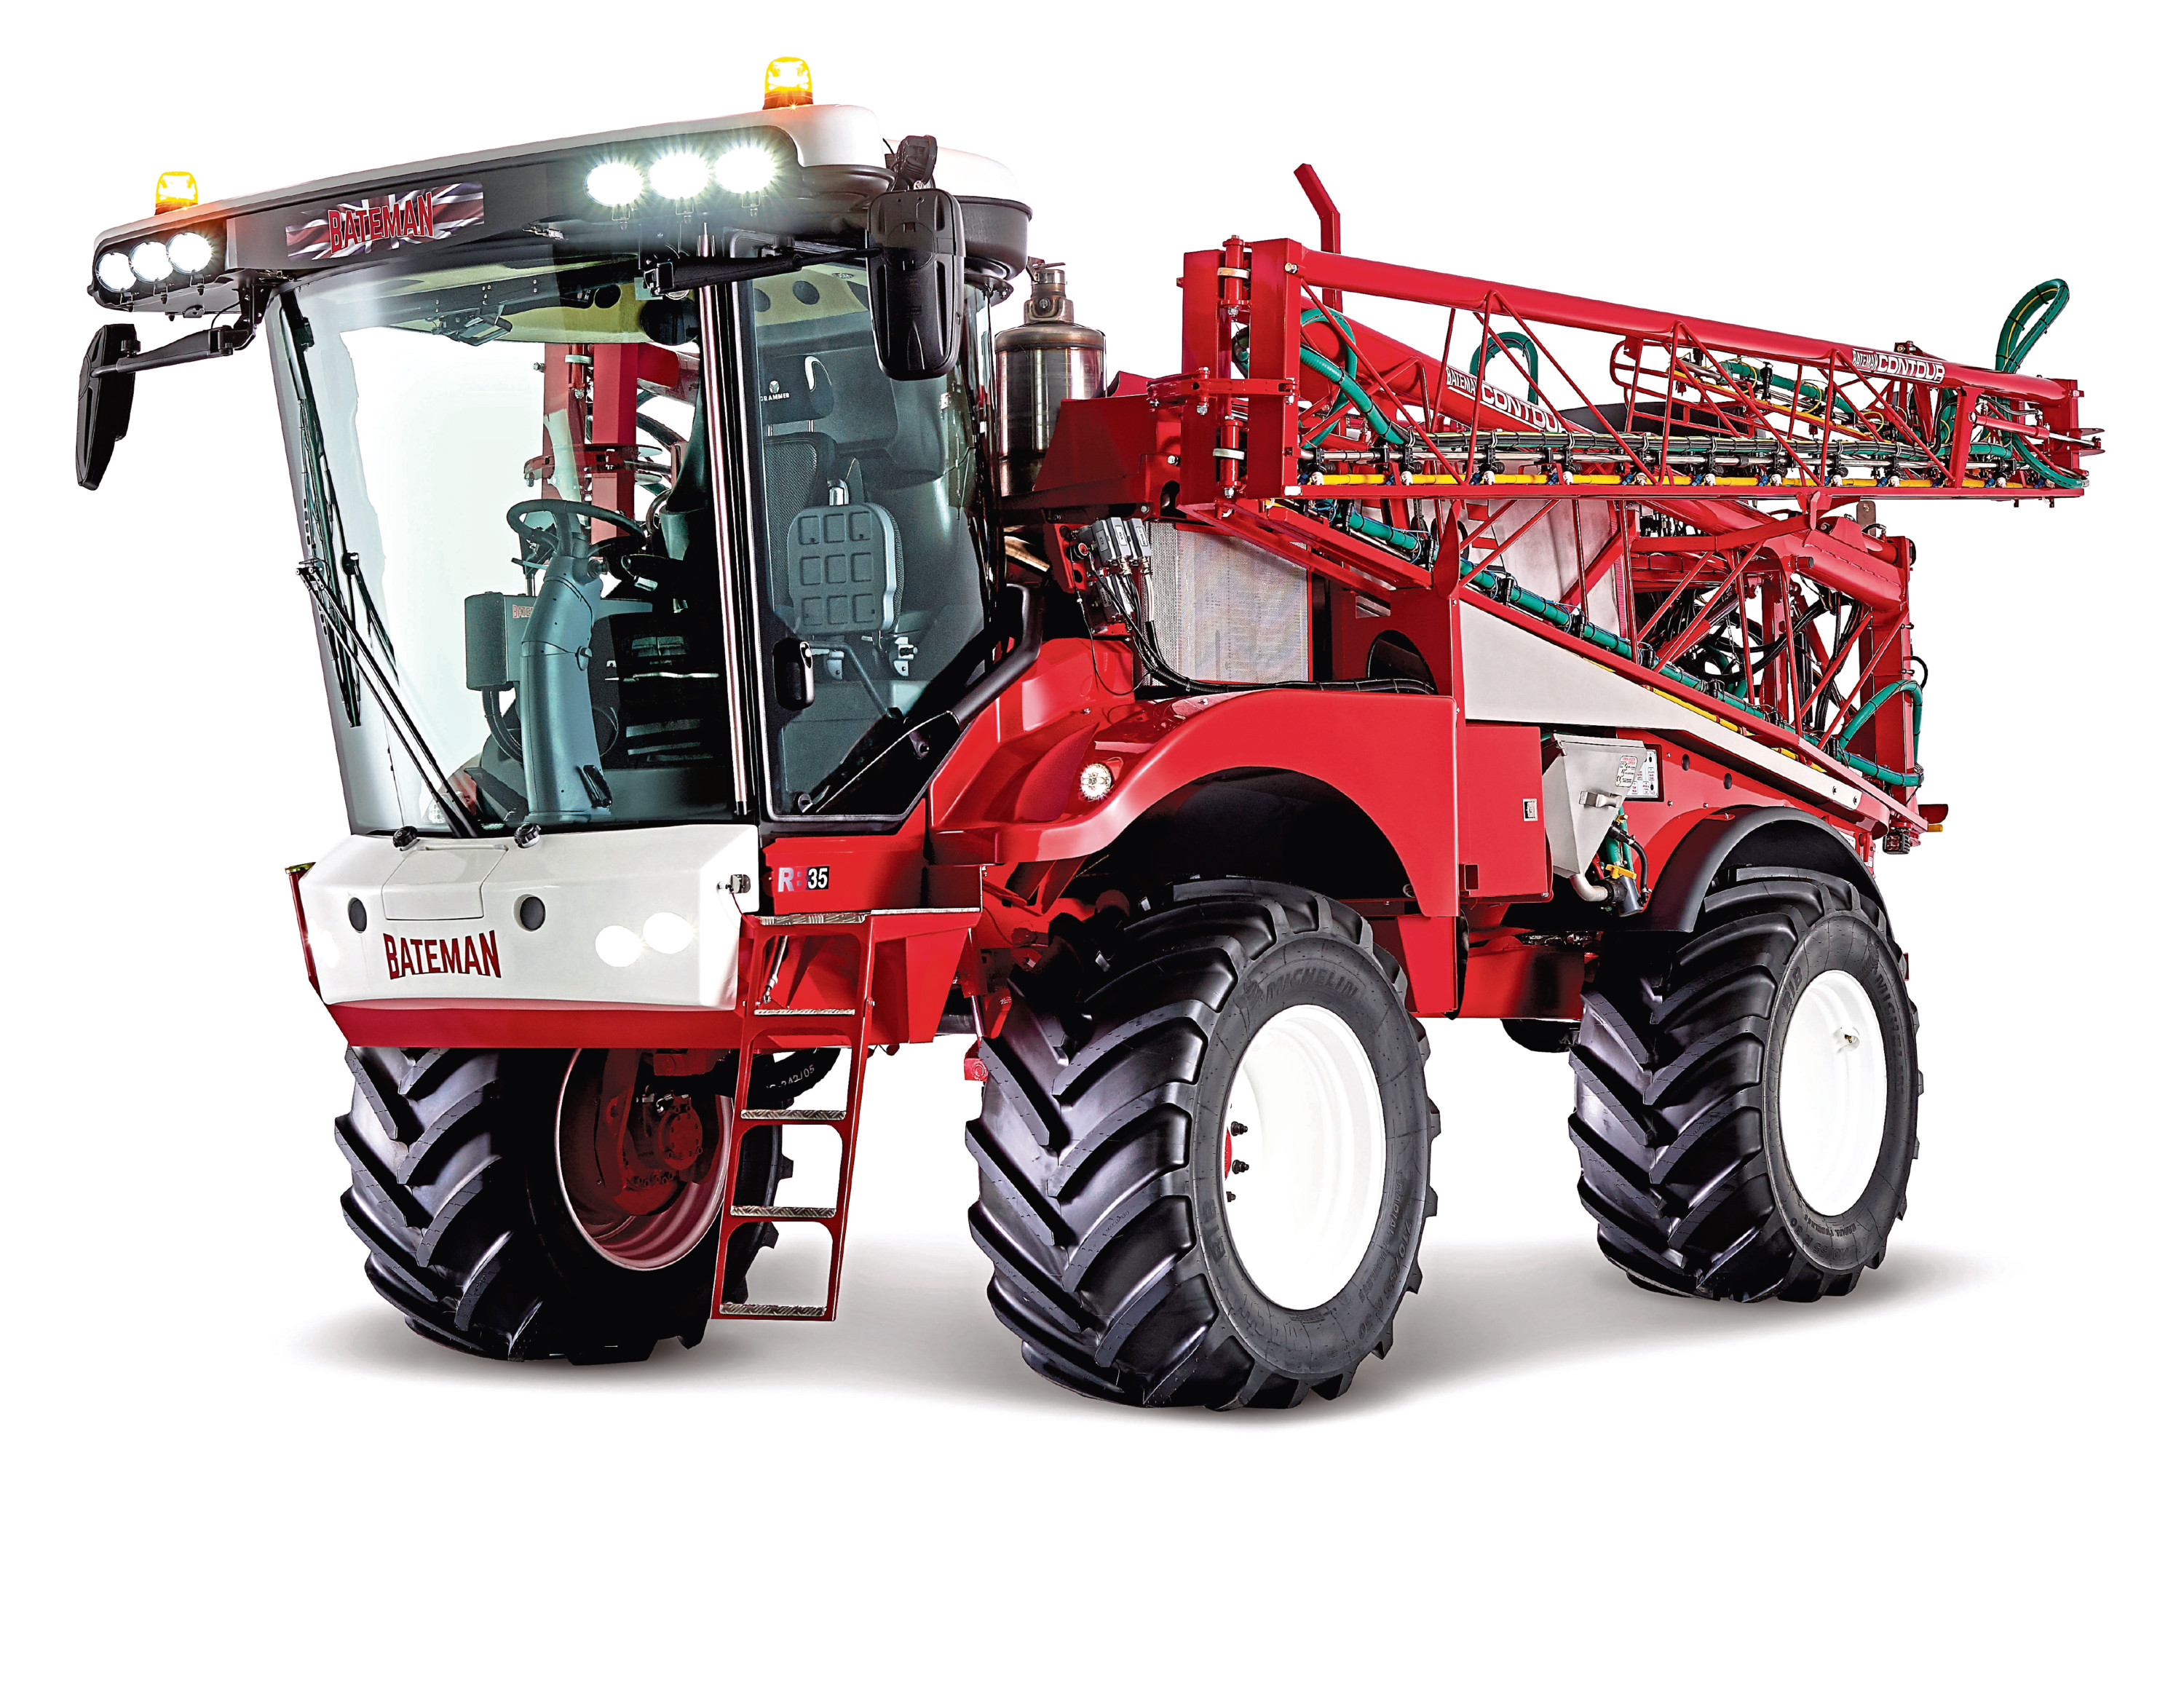 A pulse width frequency modulation spraying system is a new option for the latest Bateman self-propelled sprayers, including this range-topping 5100-litre (1350gal) RB35.